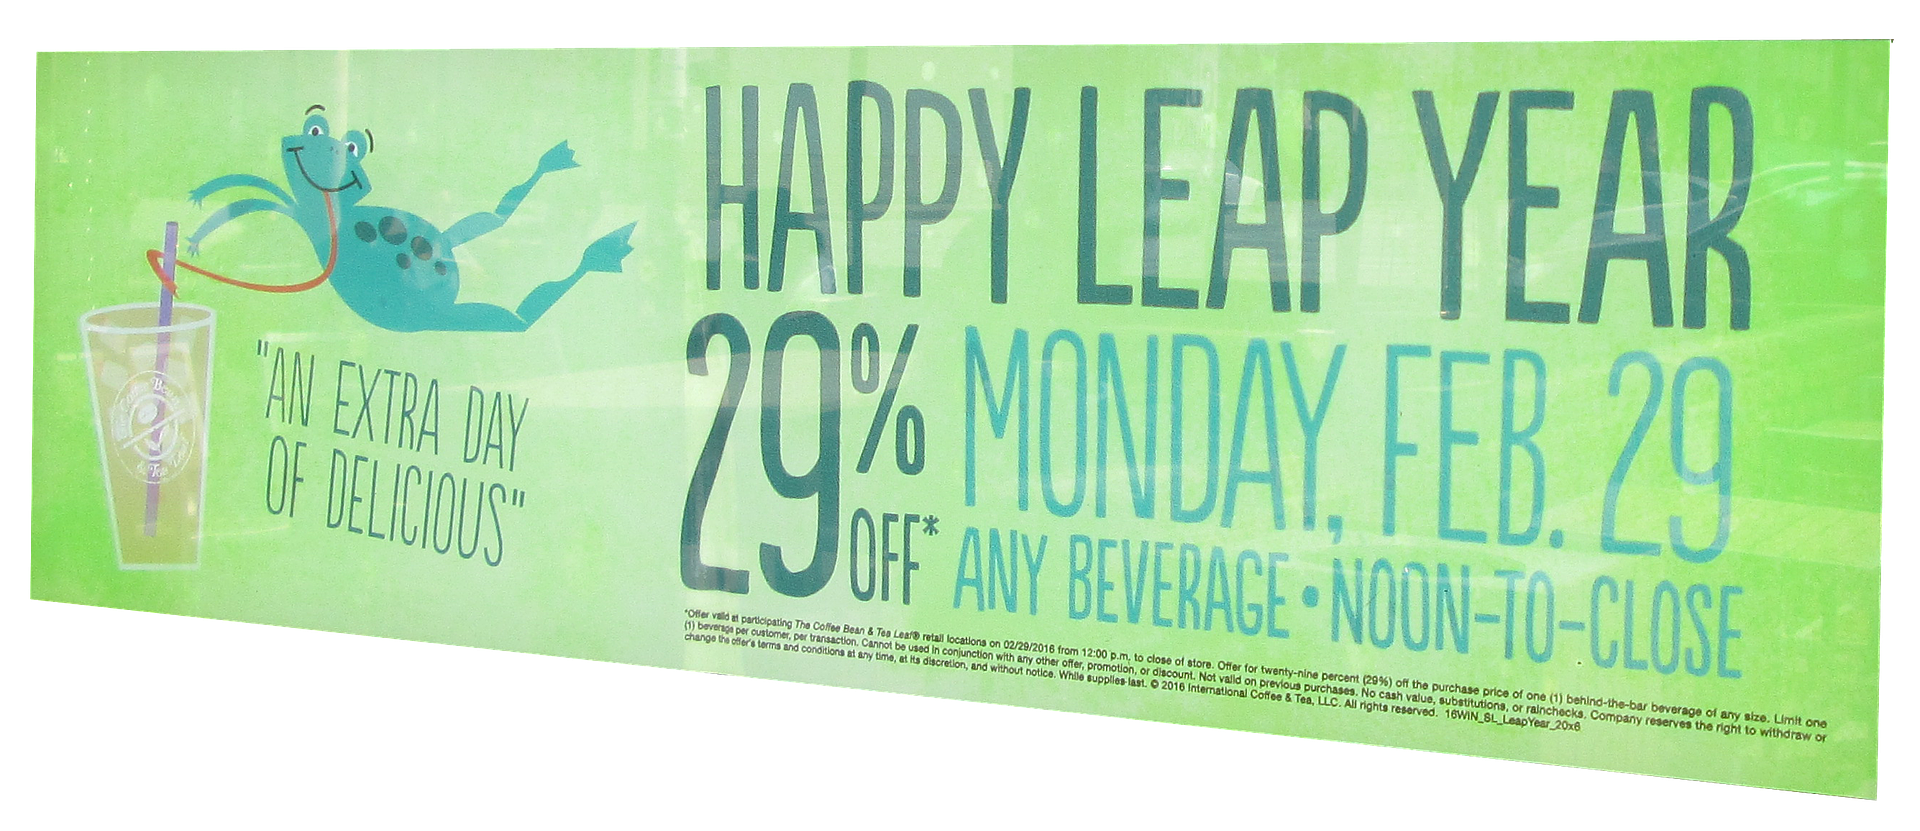 29% off on leap day